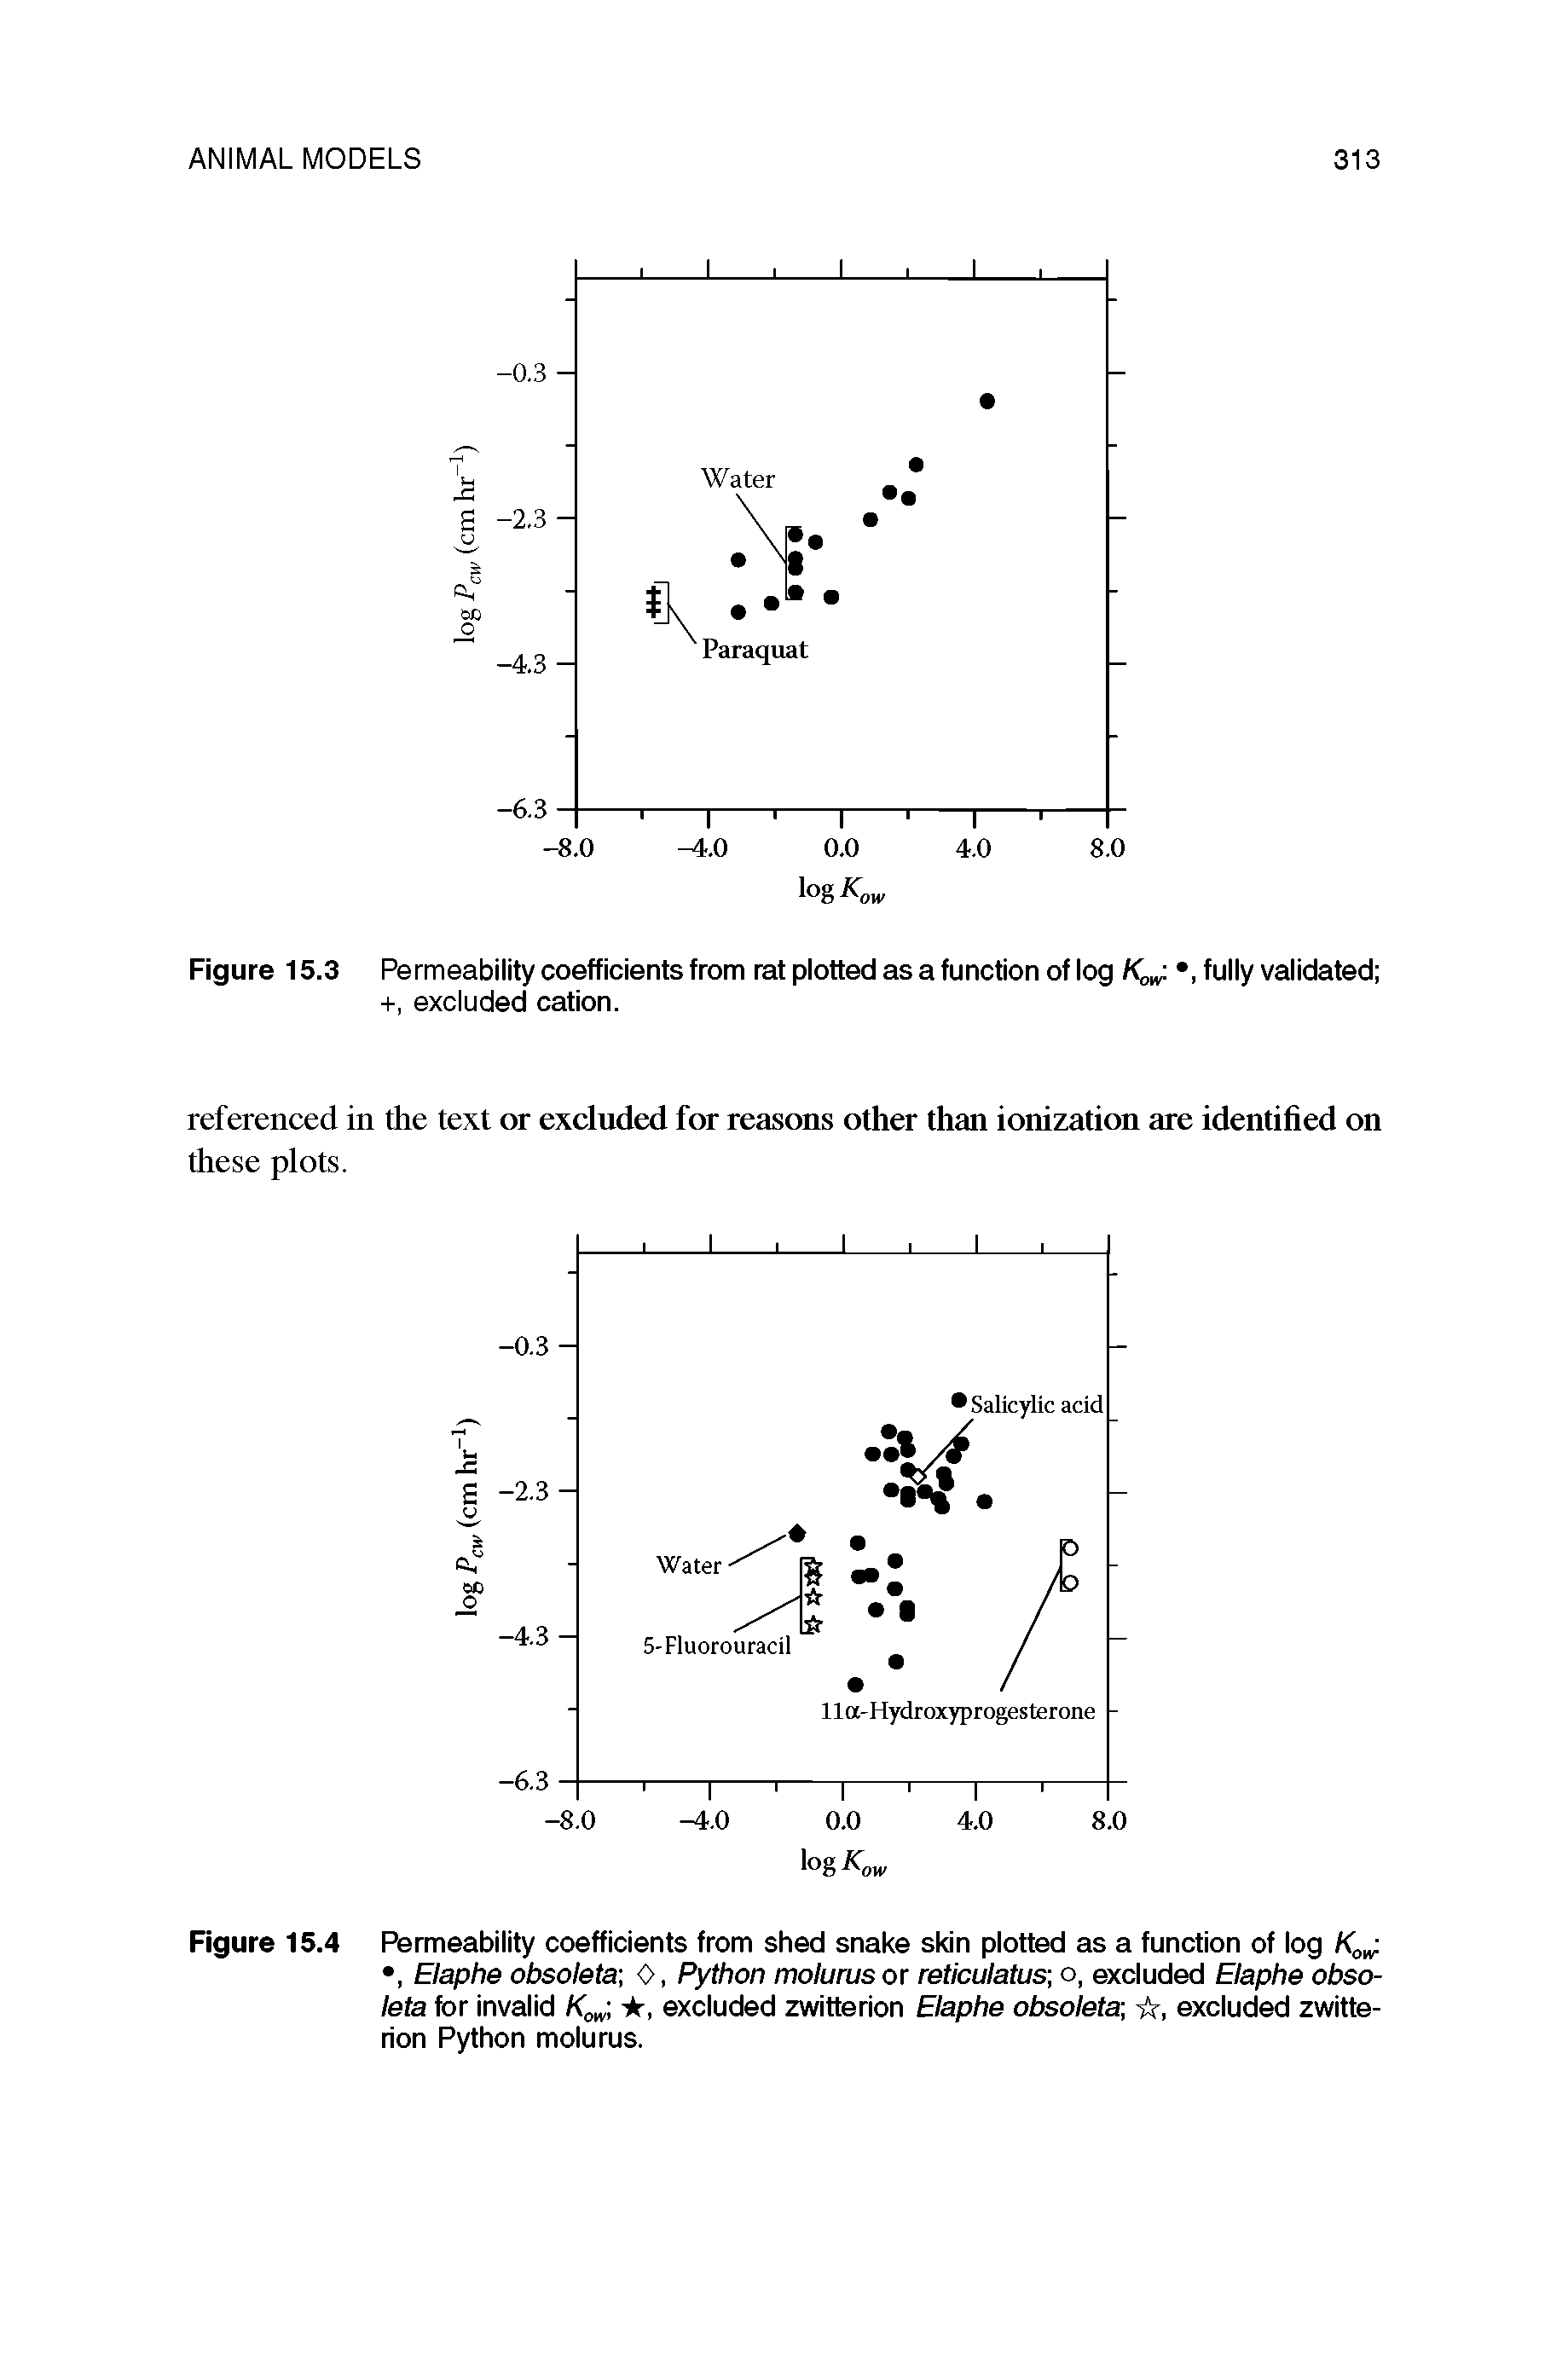 Figure 15.4 Permeability coefficients from shed snake skin plotted as a function of log Ko , Elaphe obsoleta-, 0, Python molurus or reticulatus] o, excluded Elaphe obso-leta for invalid K -k, excluded zwitterion Elaphe obsoleta, it, excluded zwitte-rion Python molurus.